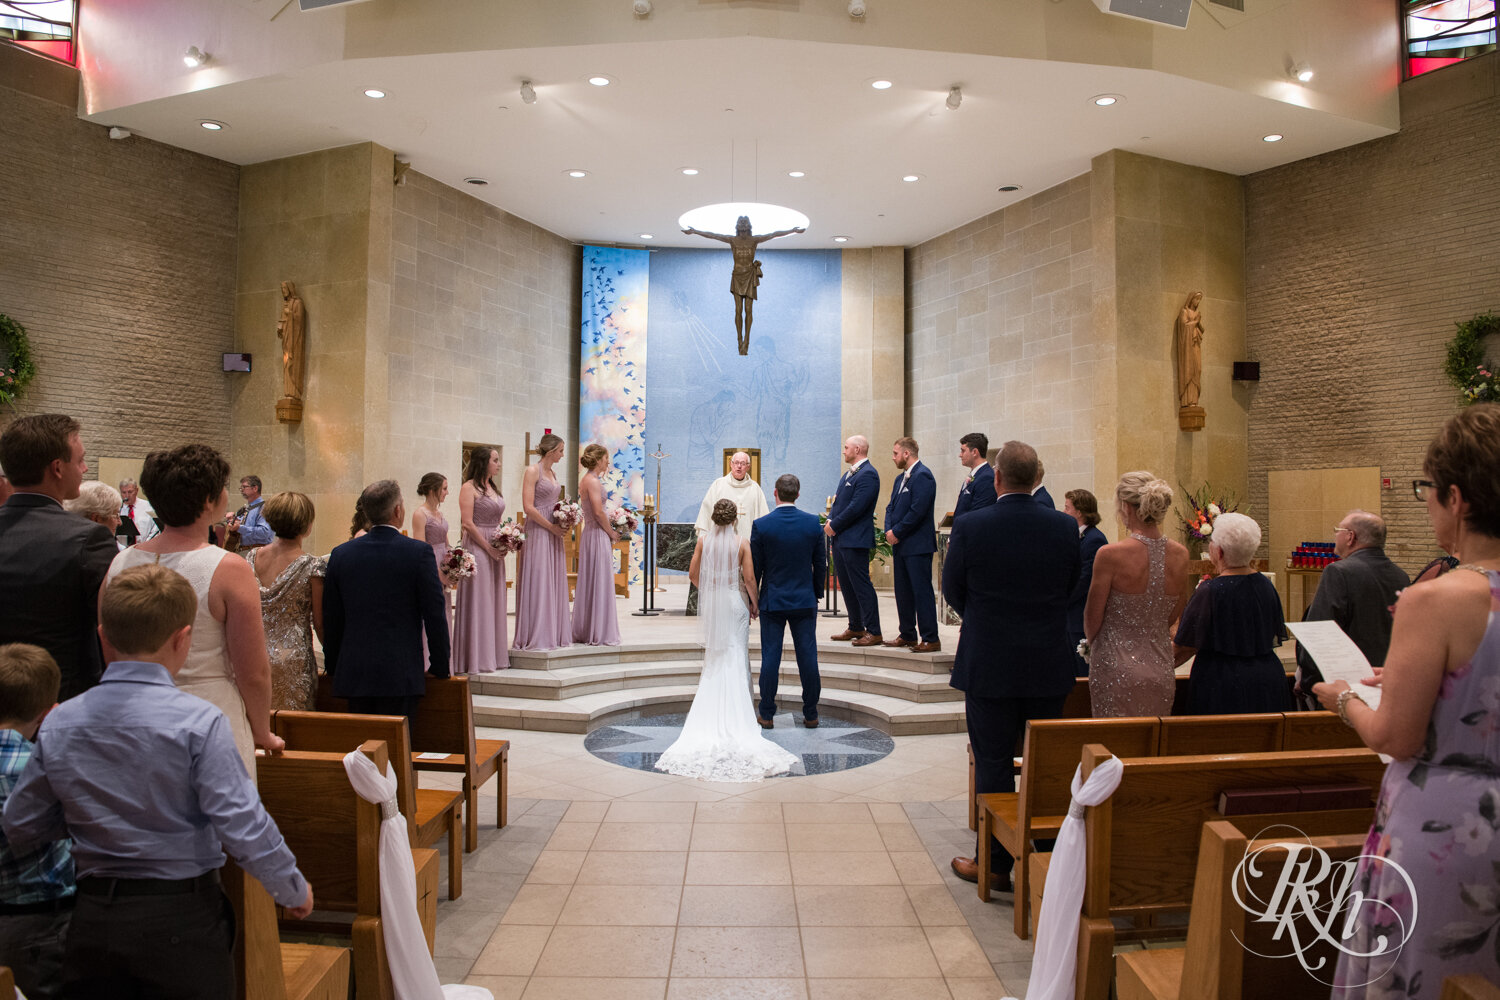 Bride and groom get married in church in Mankato, Minnesota.